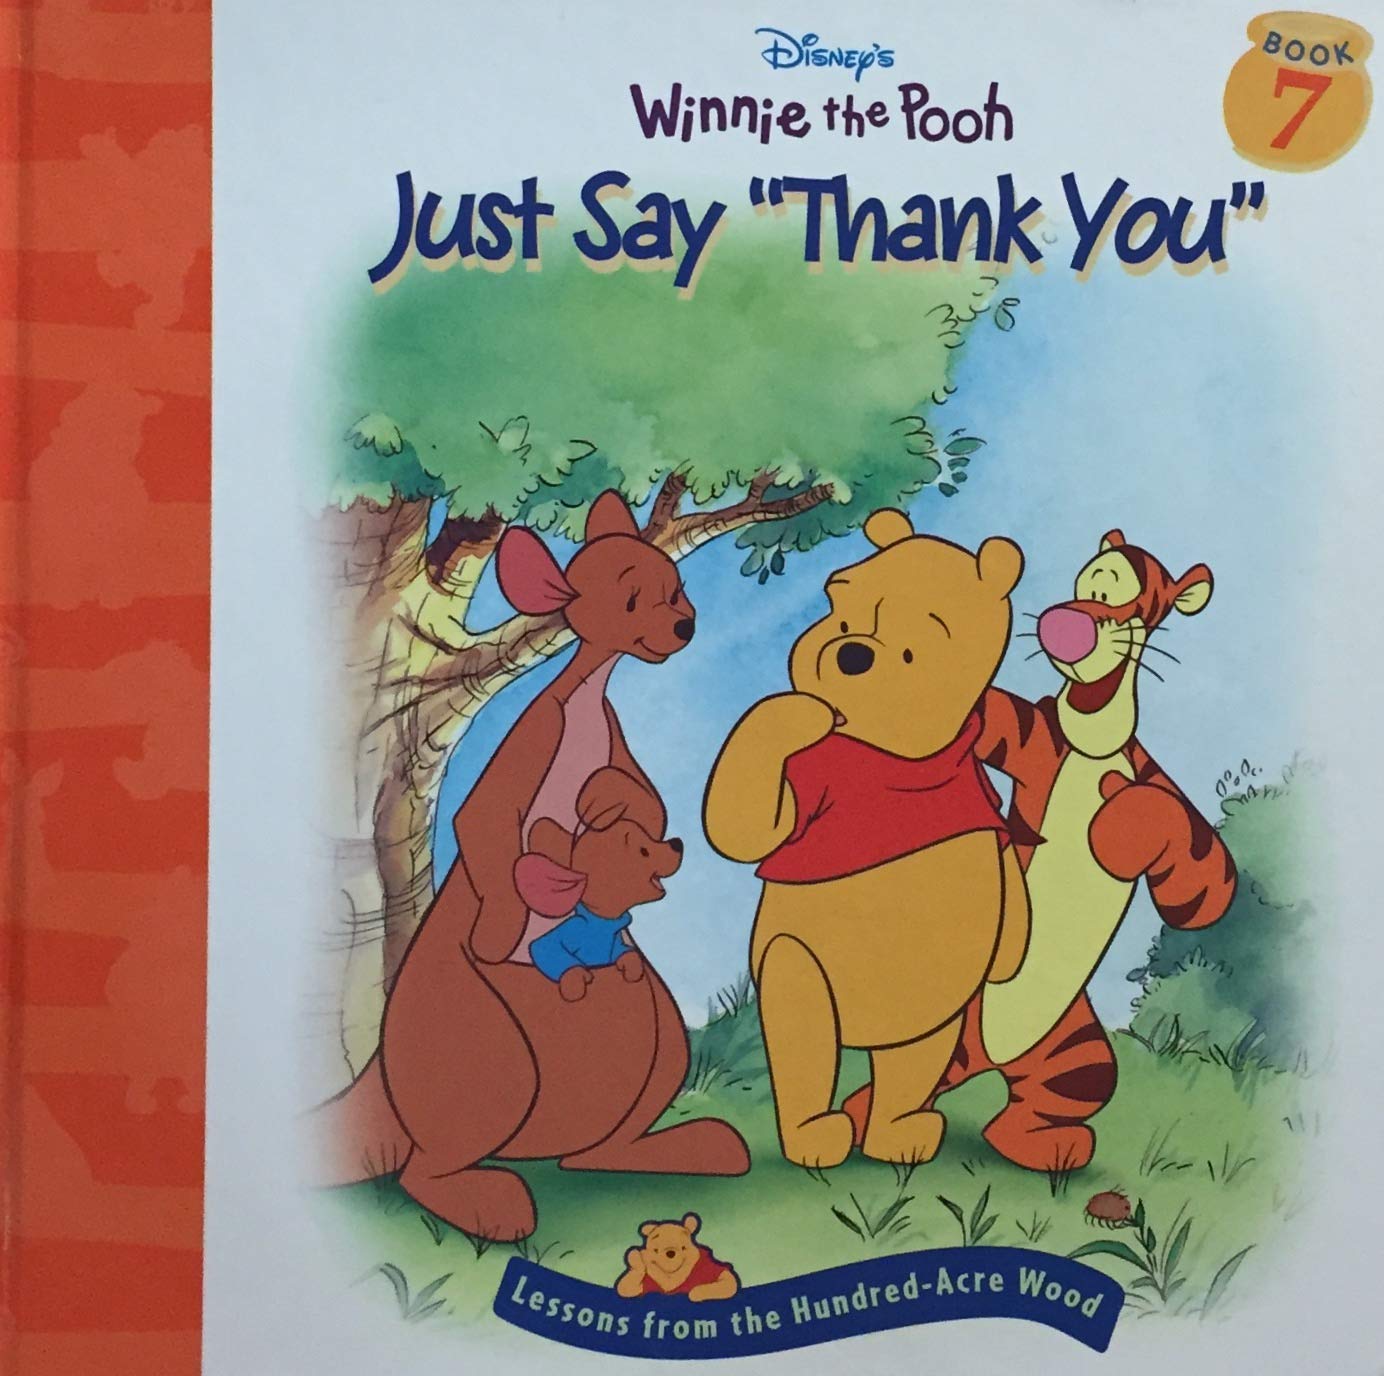 Winnie the Pooh (Lessons from the Hundred-Acre Wood) # 7 : Just Say Thank You - Disney